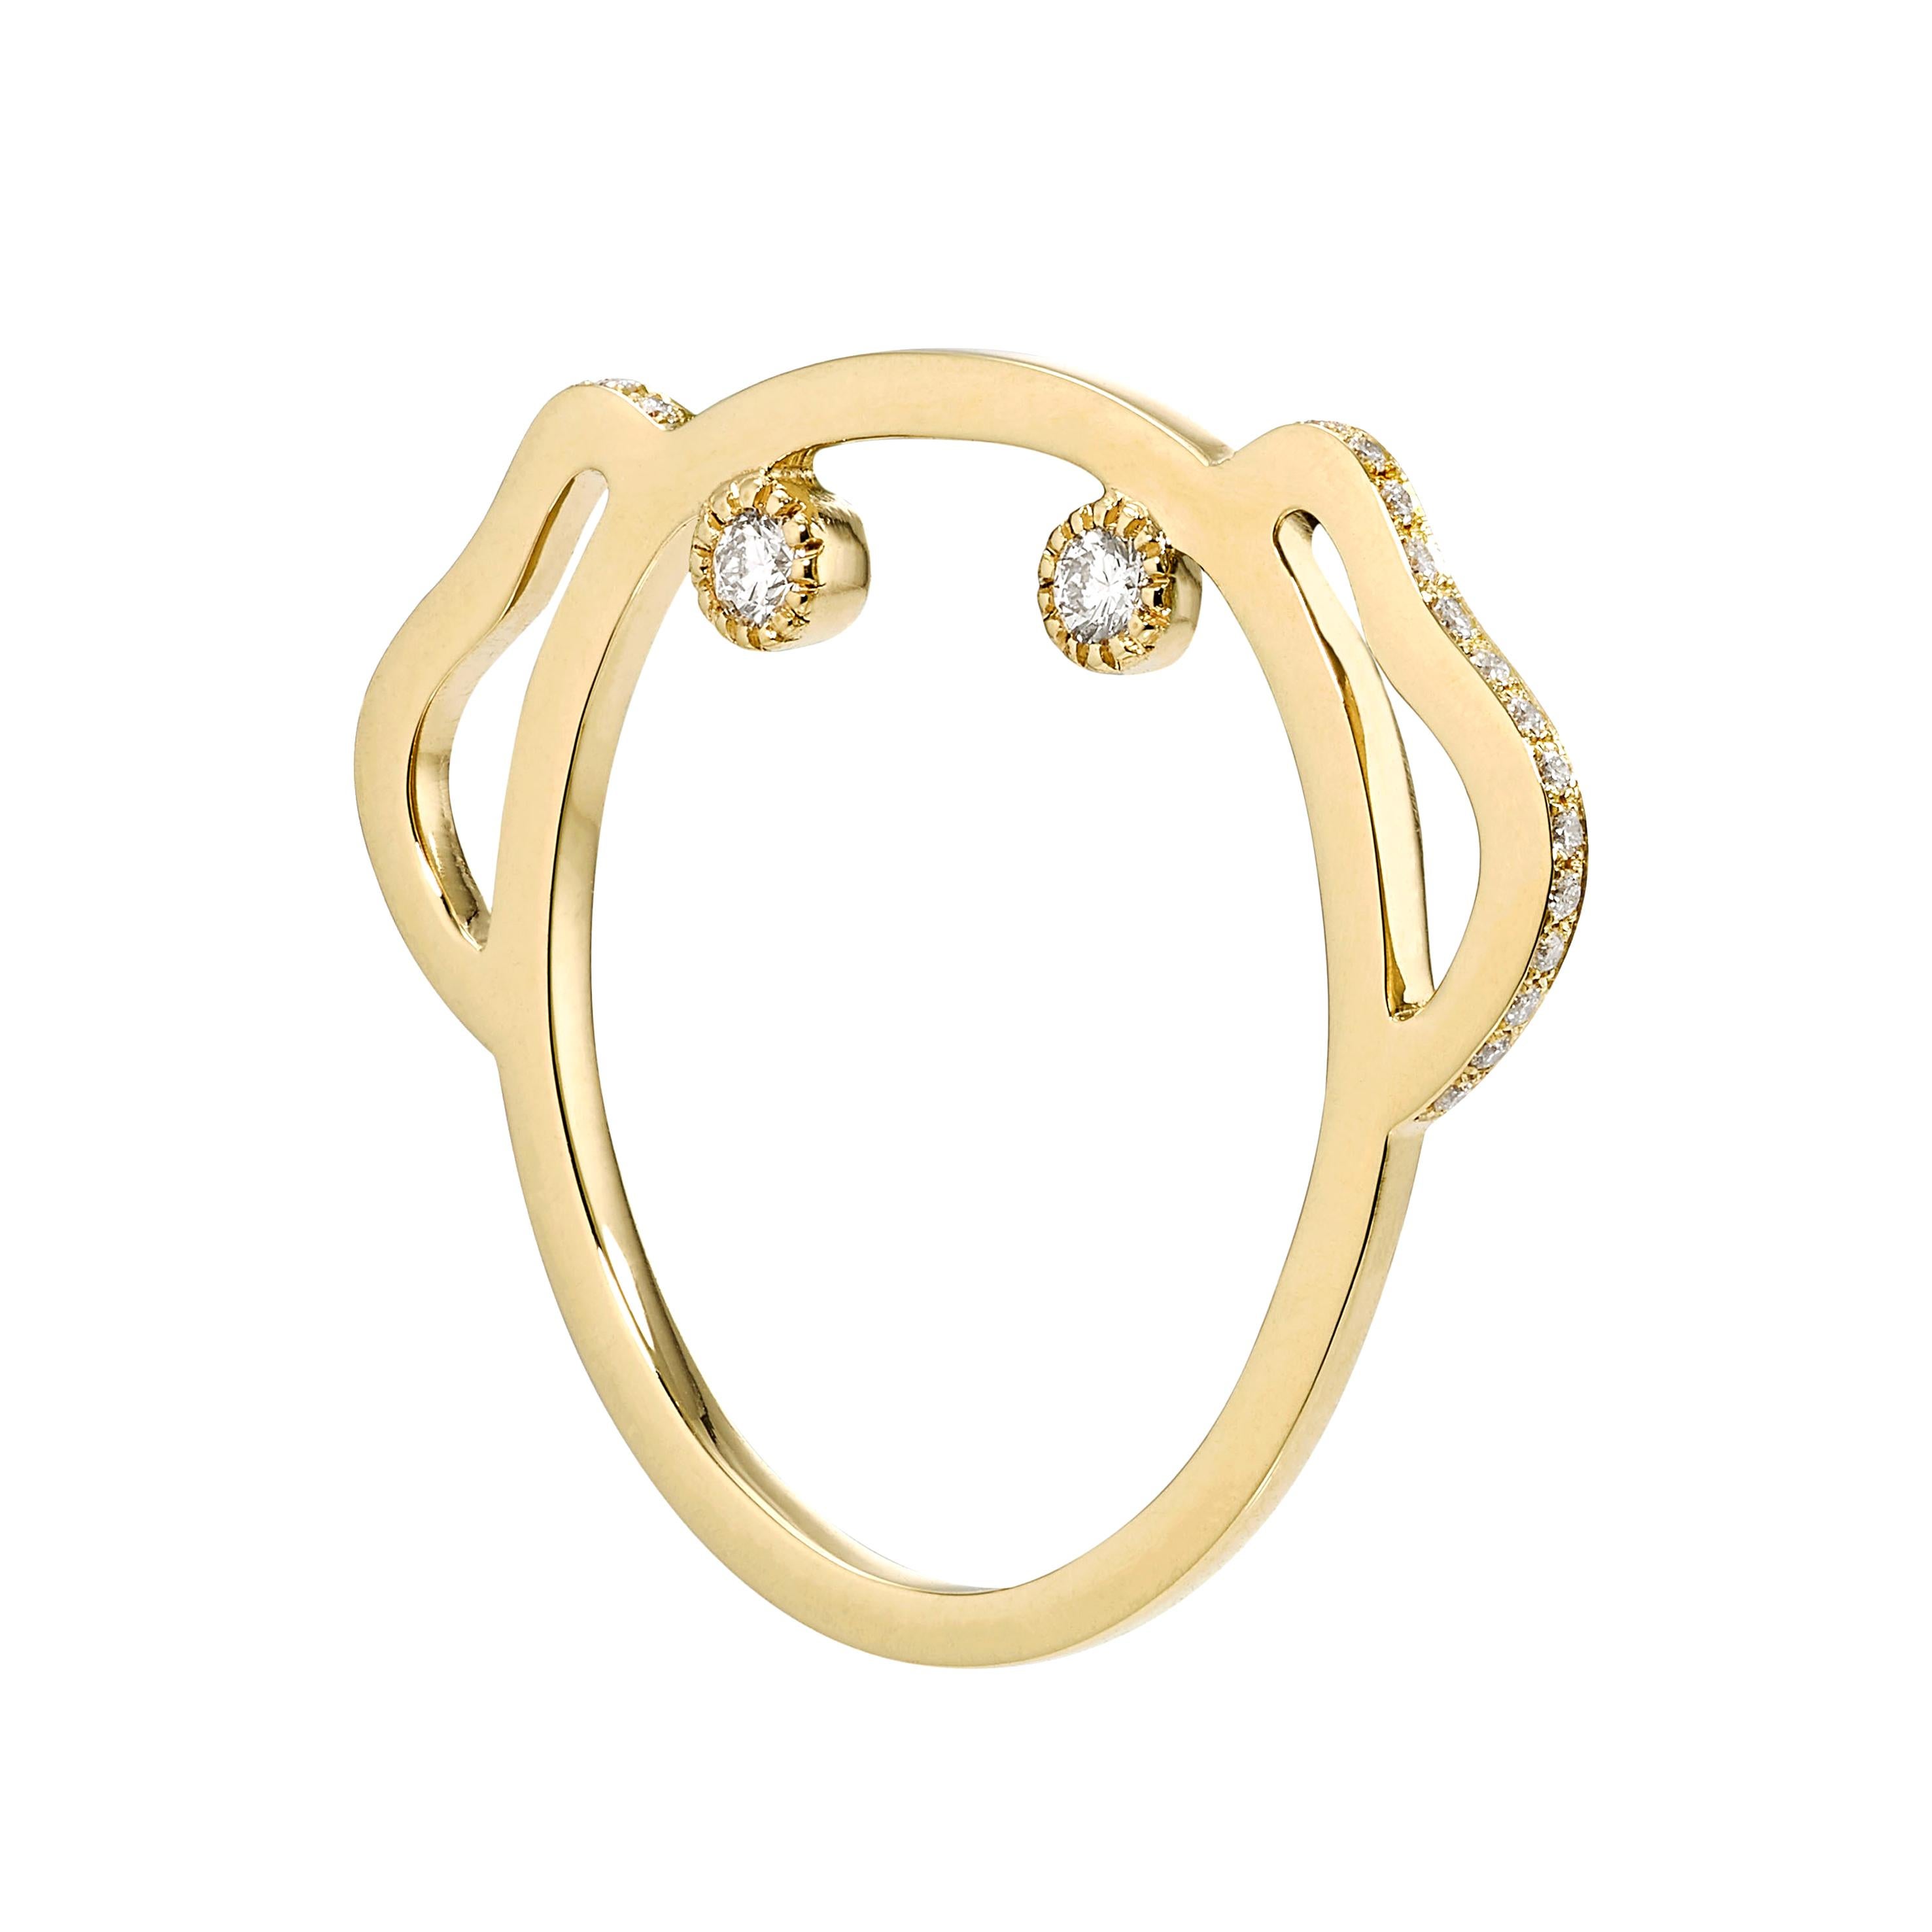 PUPPY COLLECTION 

The modern simplicity of these pieces are suitable to be worn everyday, together with Kitty Ring or in combination with your other jewellery.

Available in 14 carat yellow and white gold with white diamonds, a playful you will